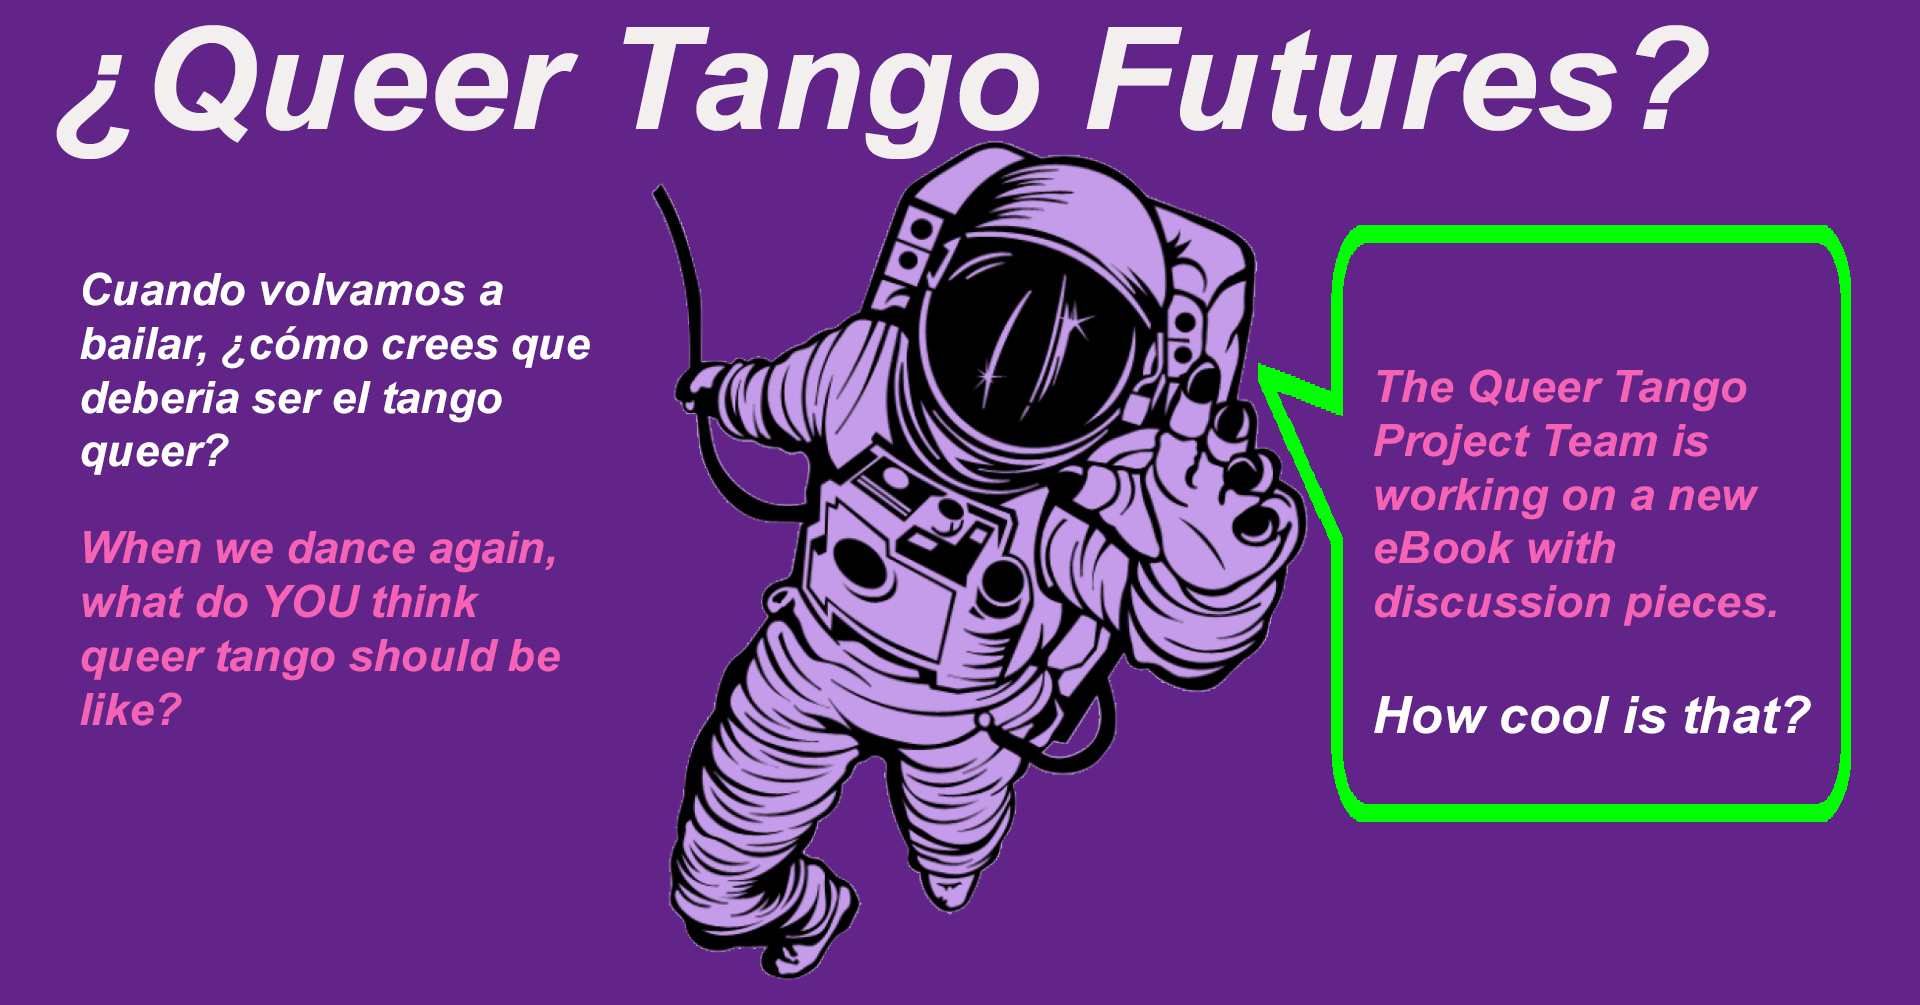 Queer Tango Futures Book Project